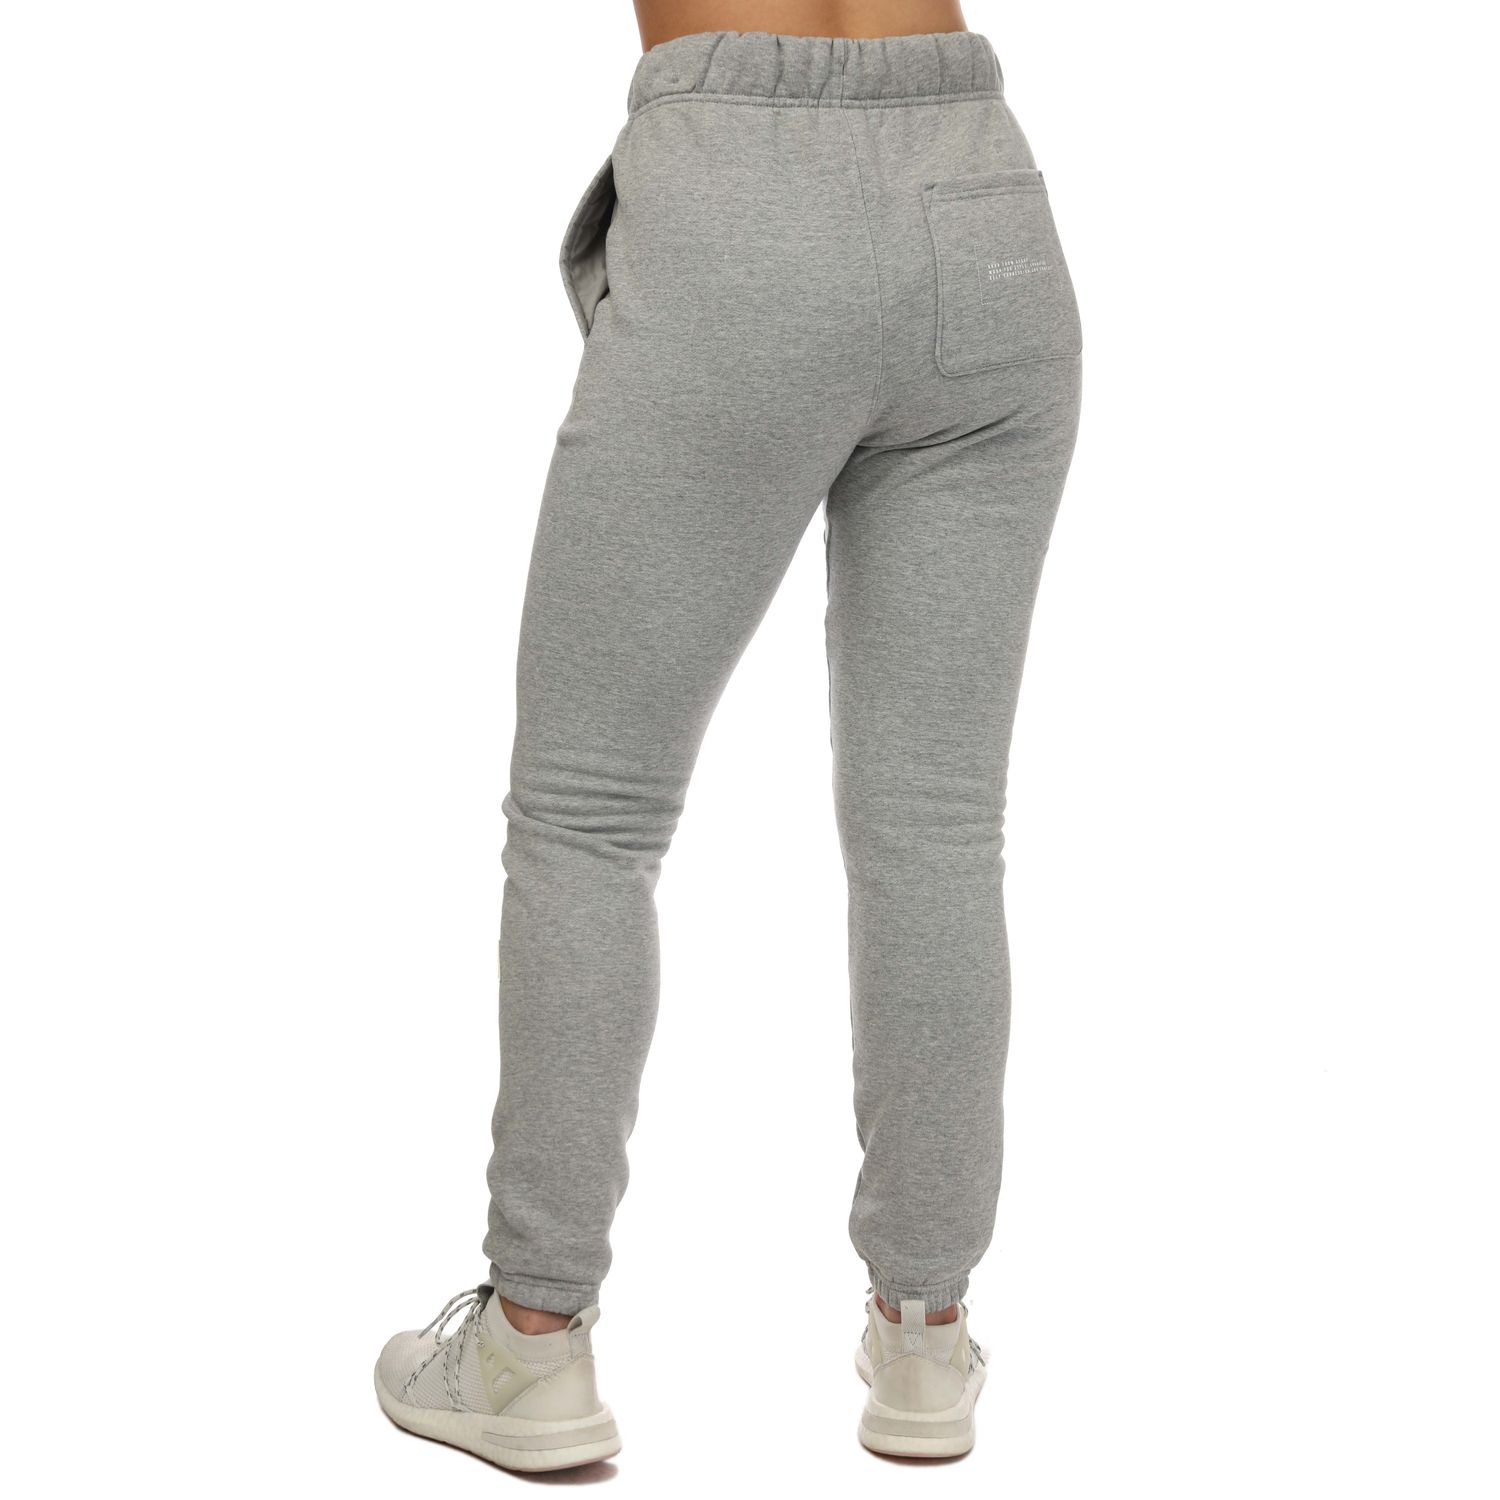 Grey Heather adidas Womens Joggers - Get The Label